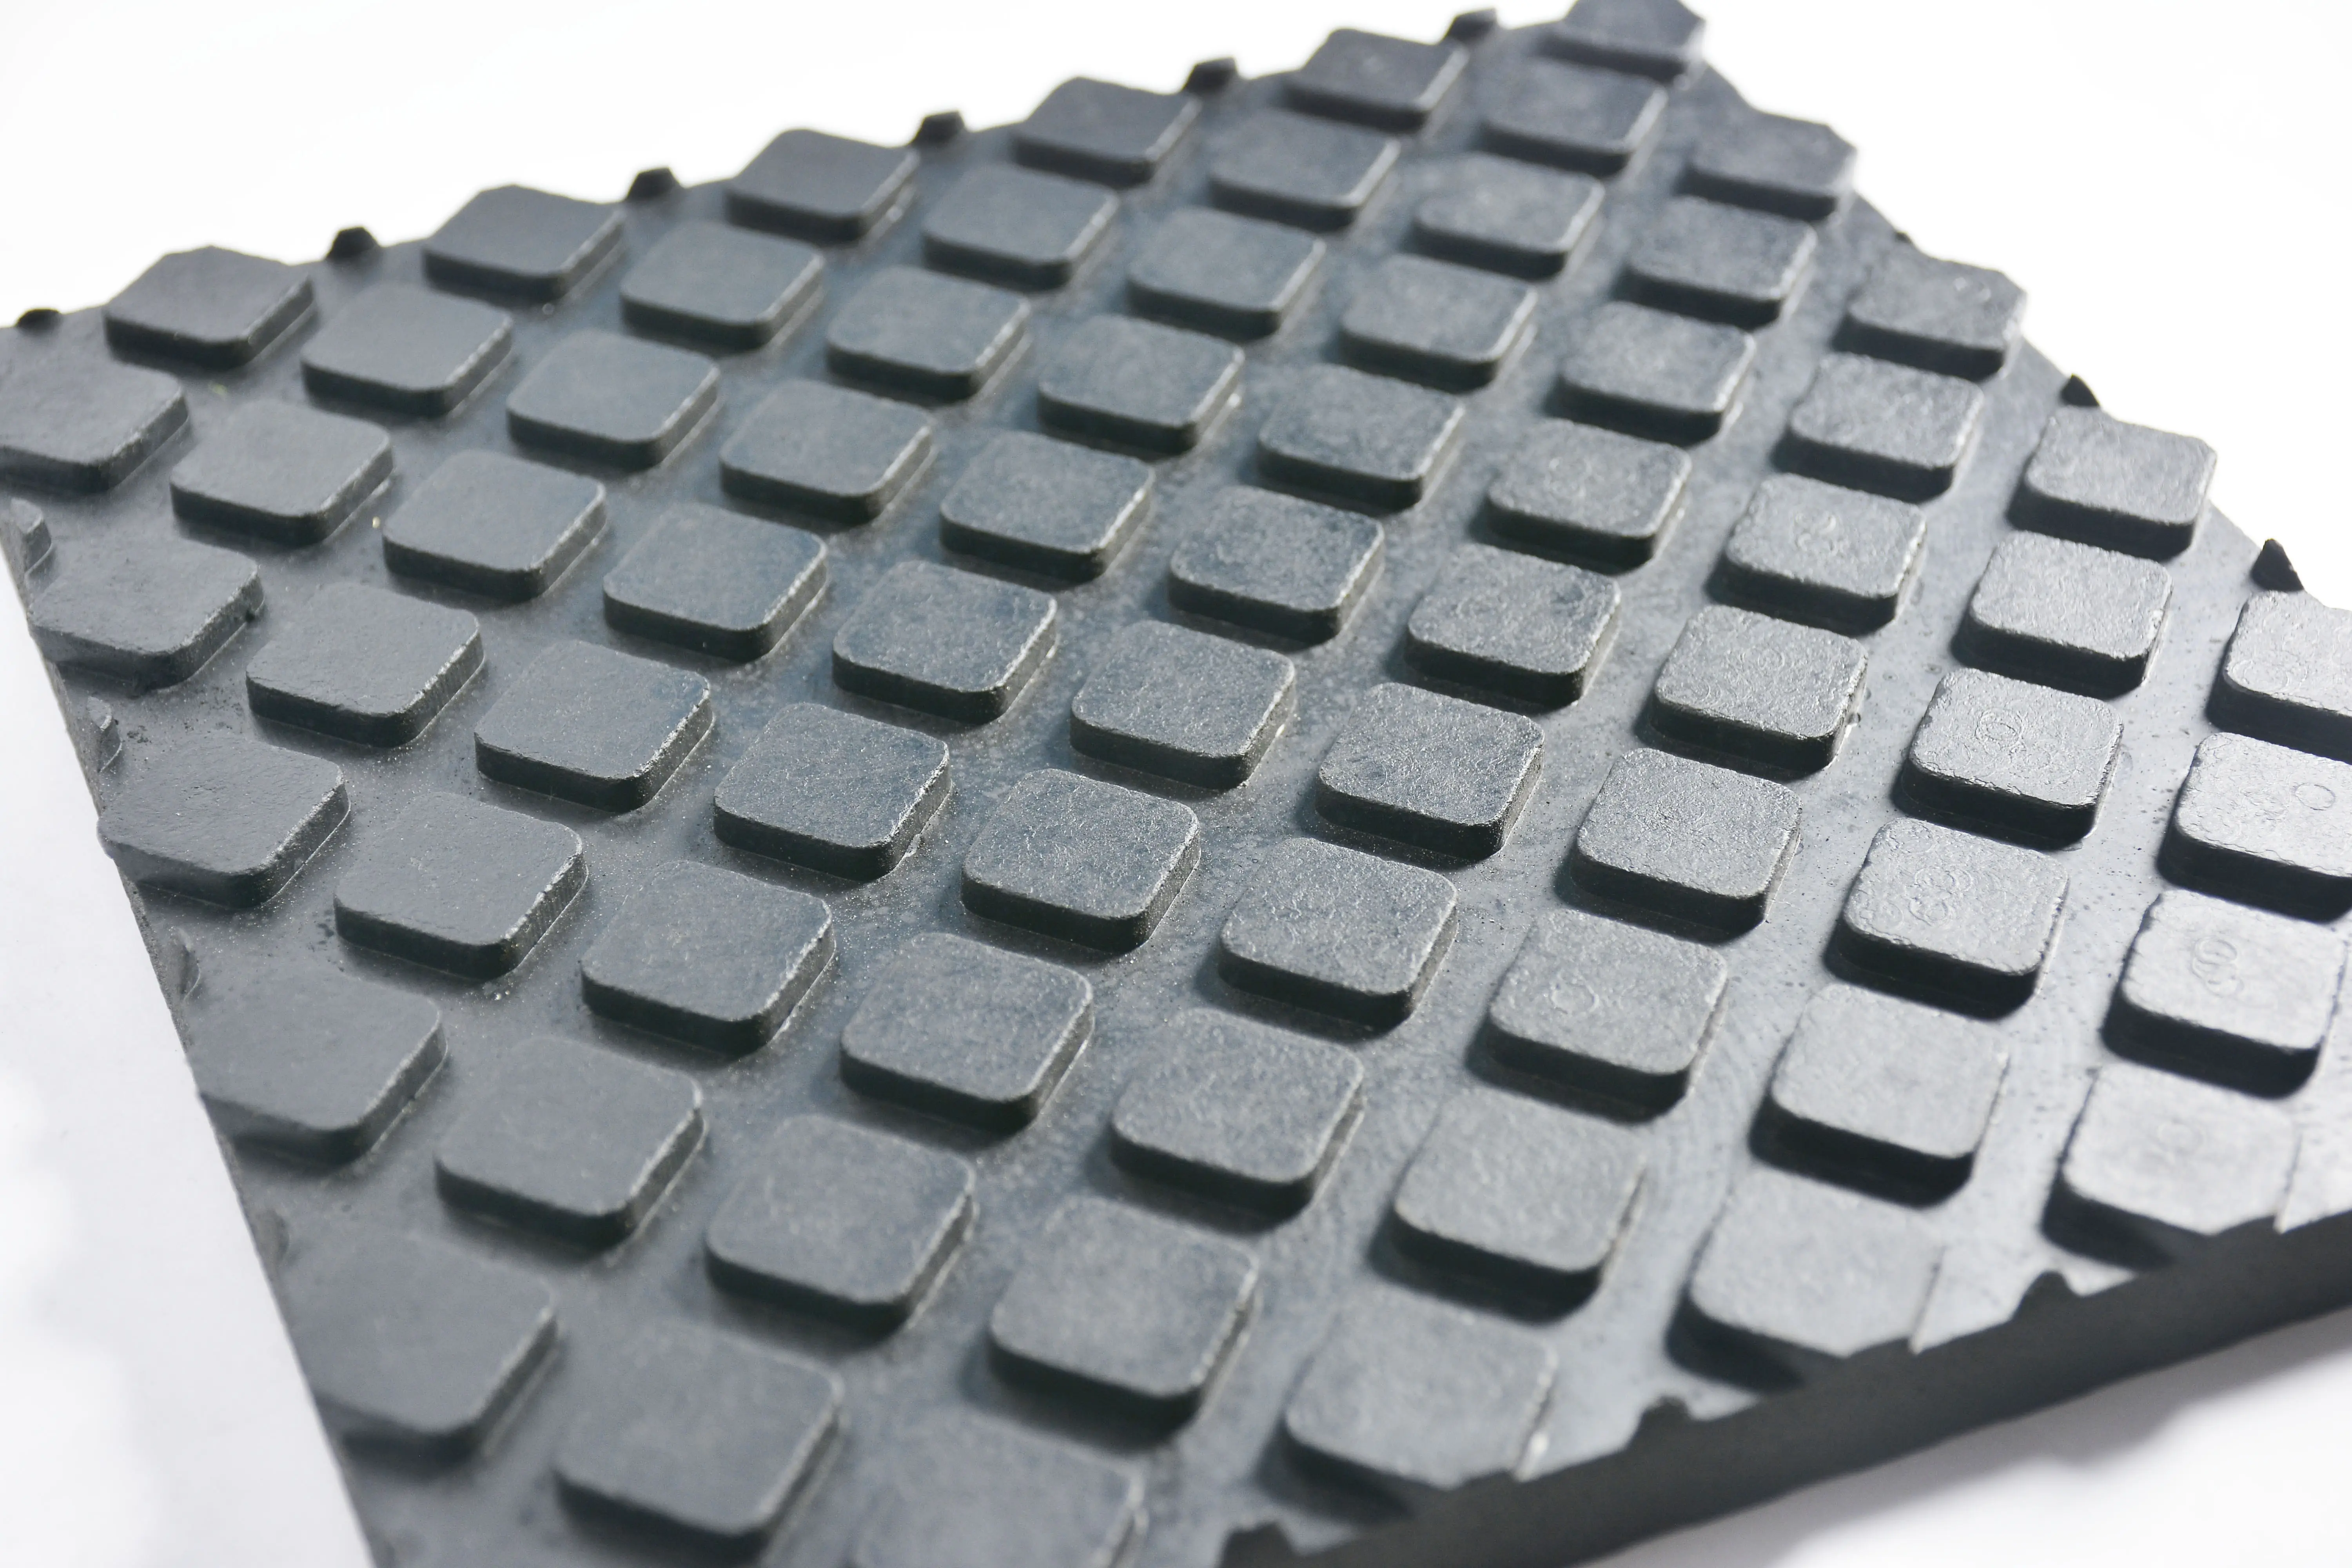 17mm thickness Rubber Stable and Cowshed Mat/EVA Dairy Cow shed/Horse stable Mats